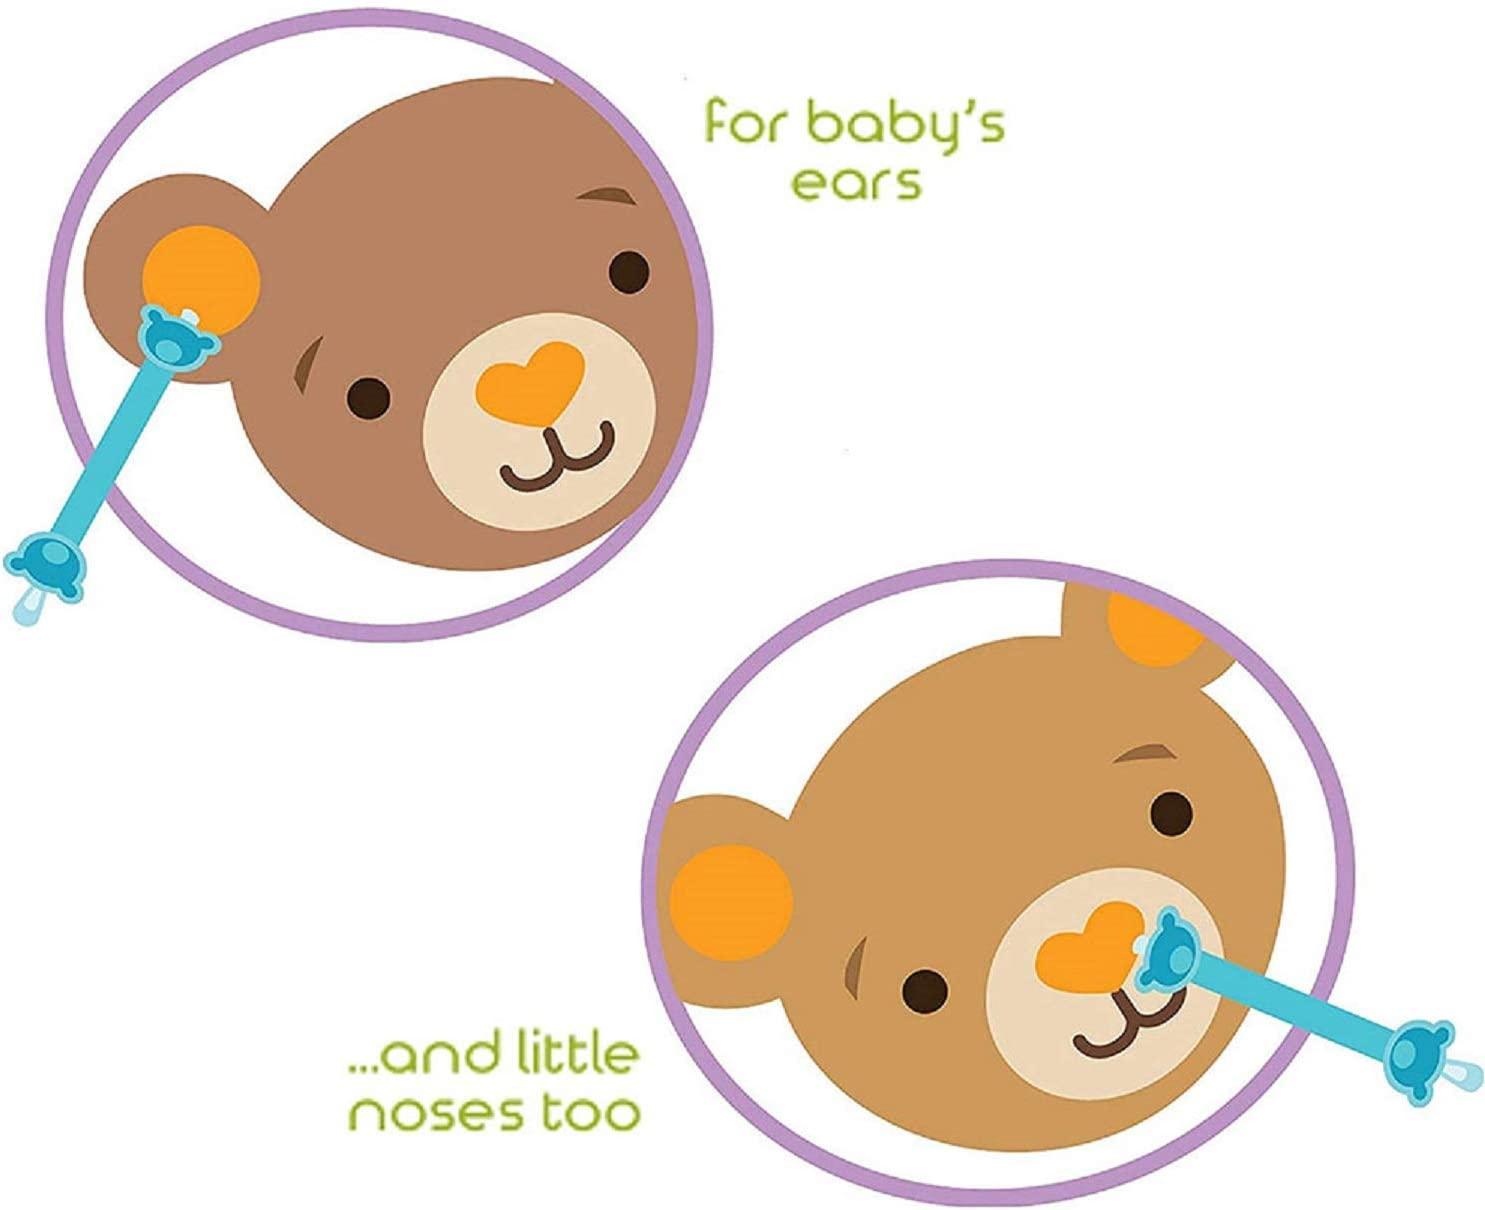 NEW - OOGIEBEAR - Comes with Case - Removes Babys Boogers & Earwax  effectively 